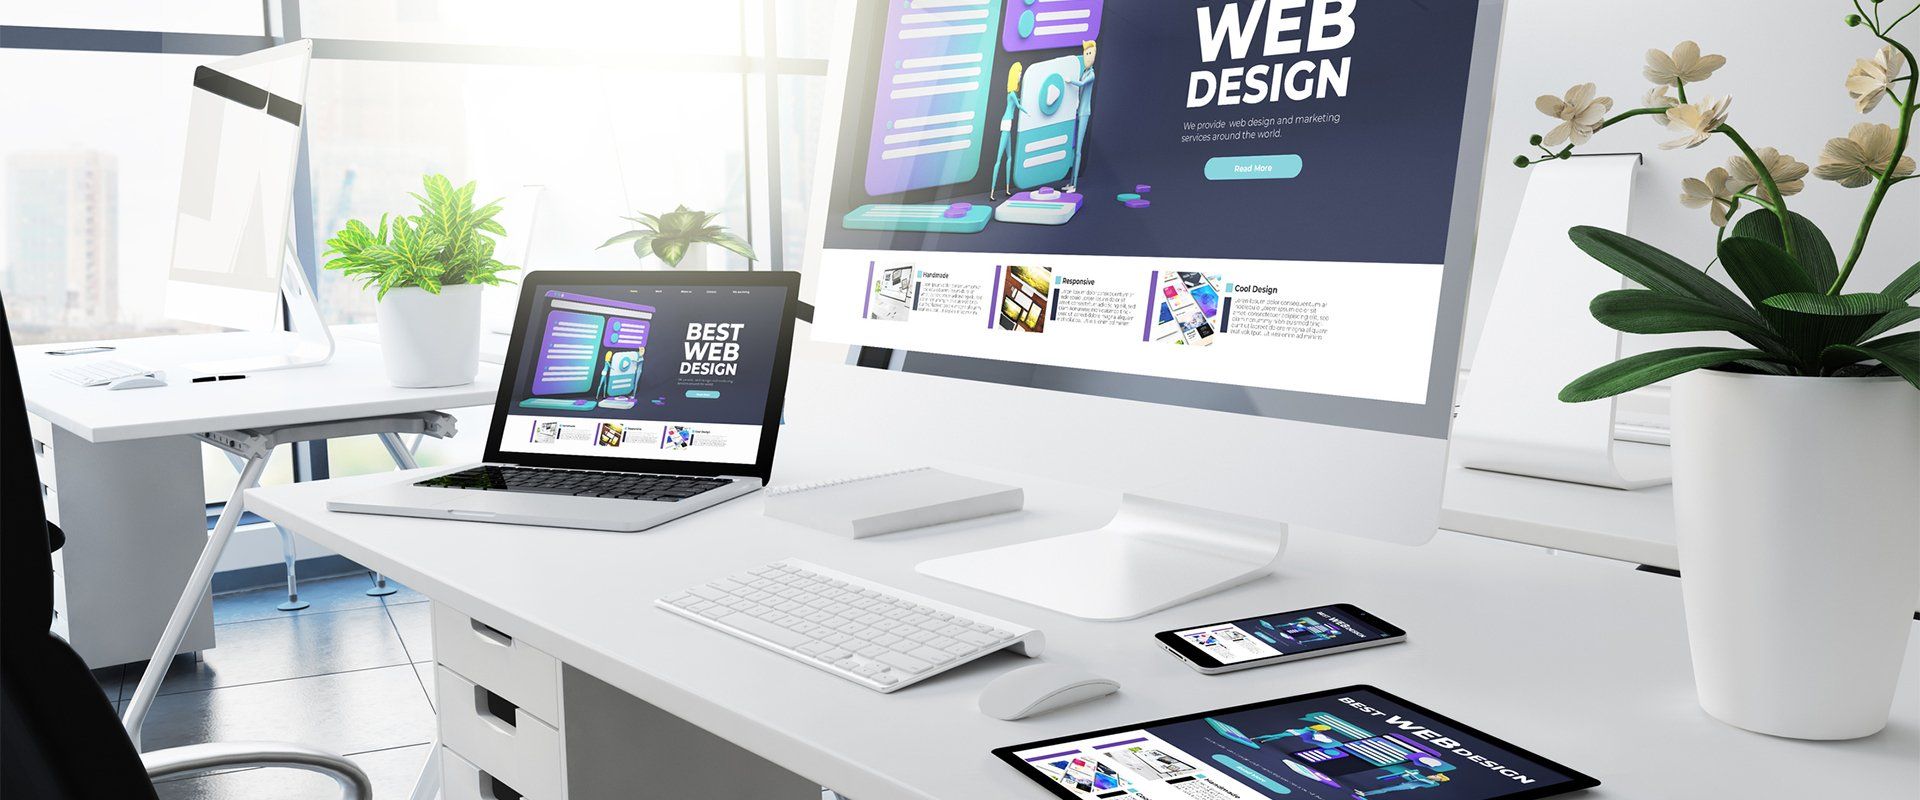 Reasons Your Web Design Needs a Makeover